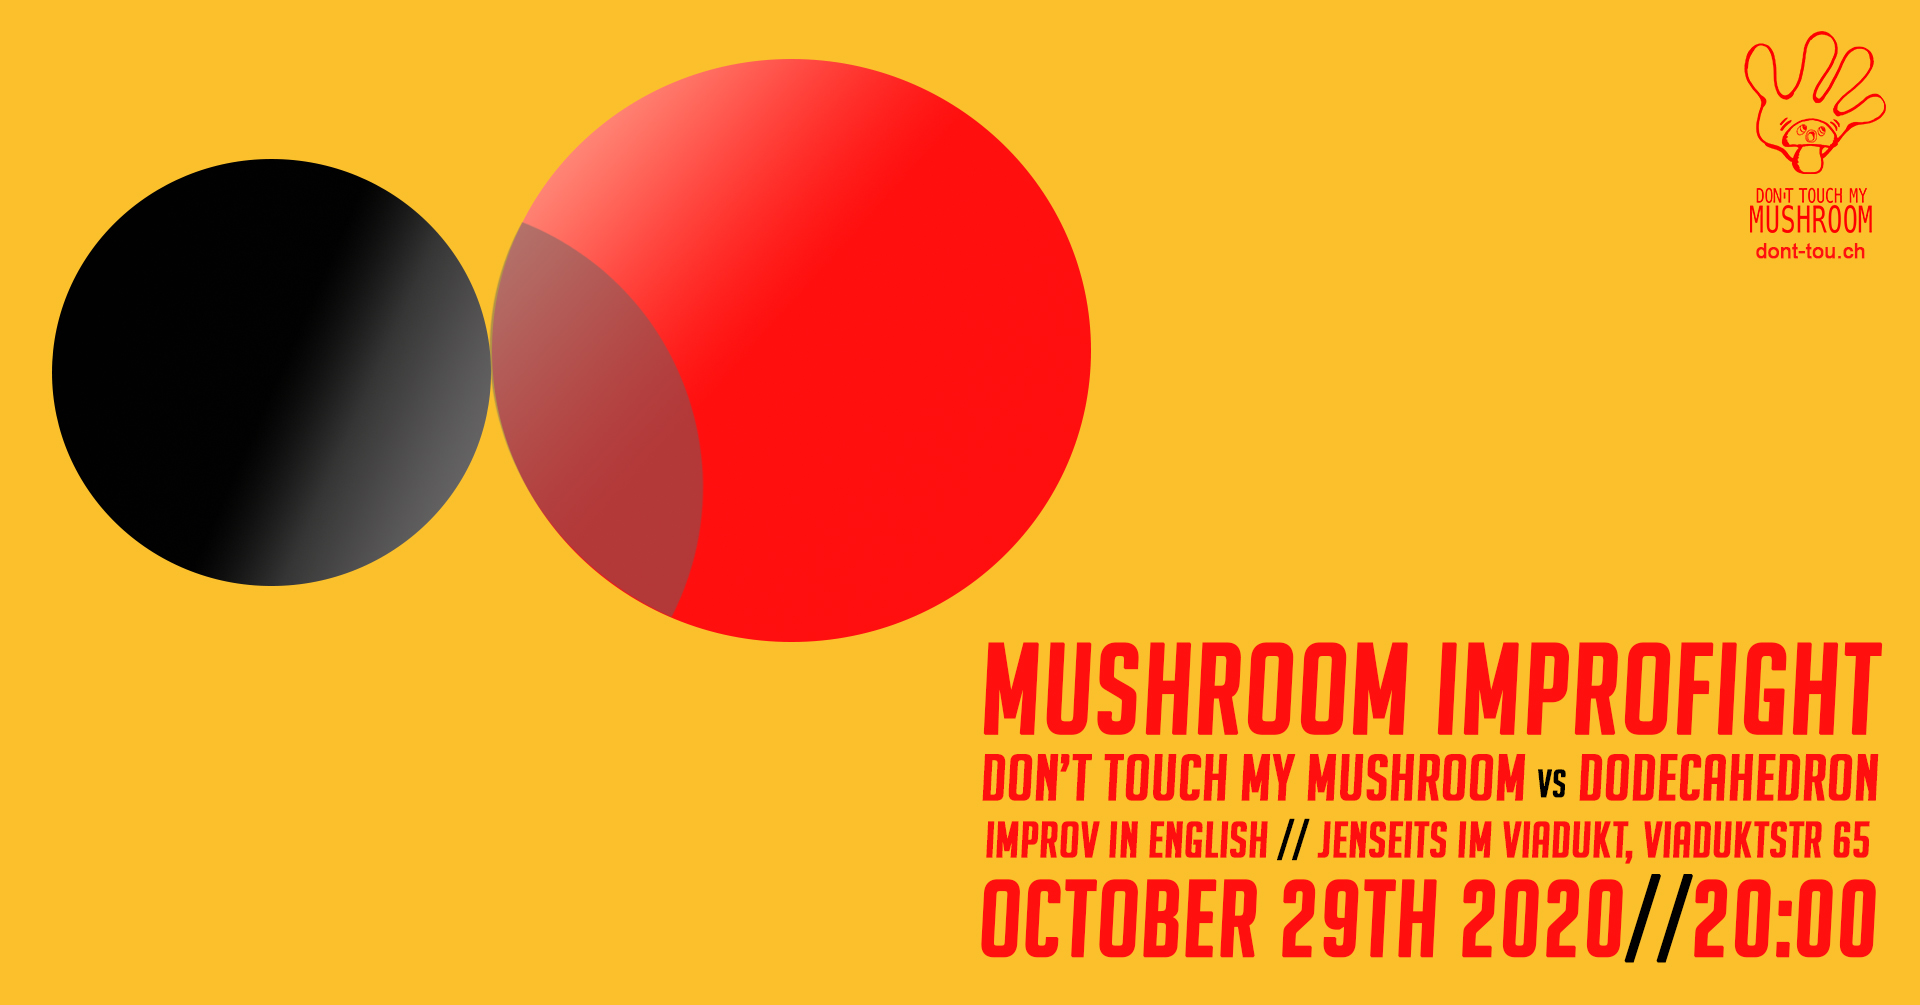 Improfight: Don't Touch My Mushroom VS Dodecahedron